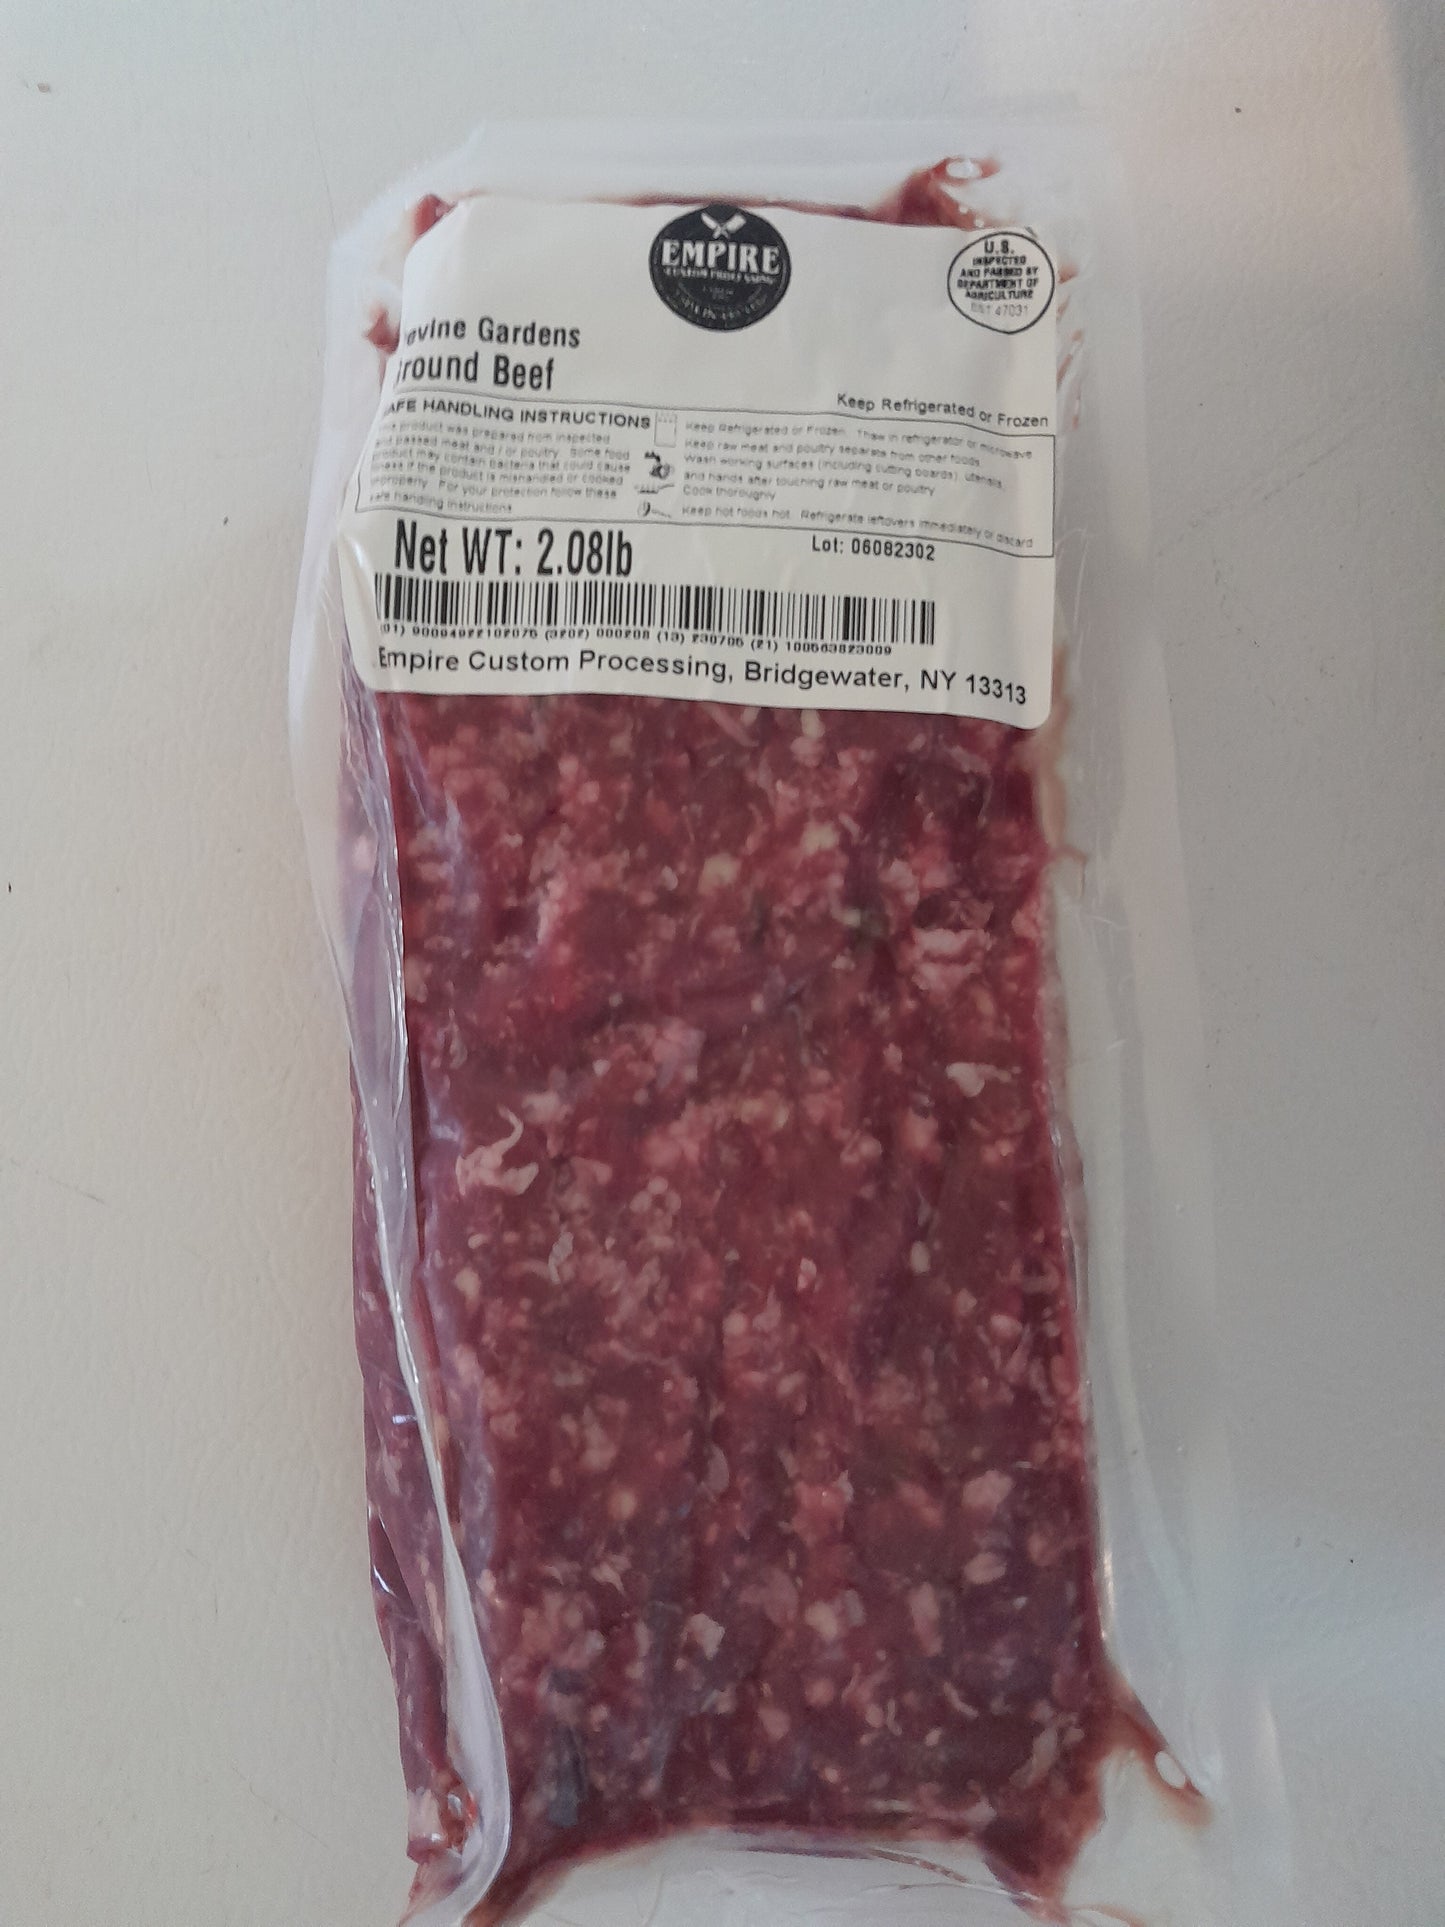 Ground beef bundle -10 pounds for $65.00 - sold in 2 pound packages